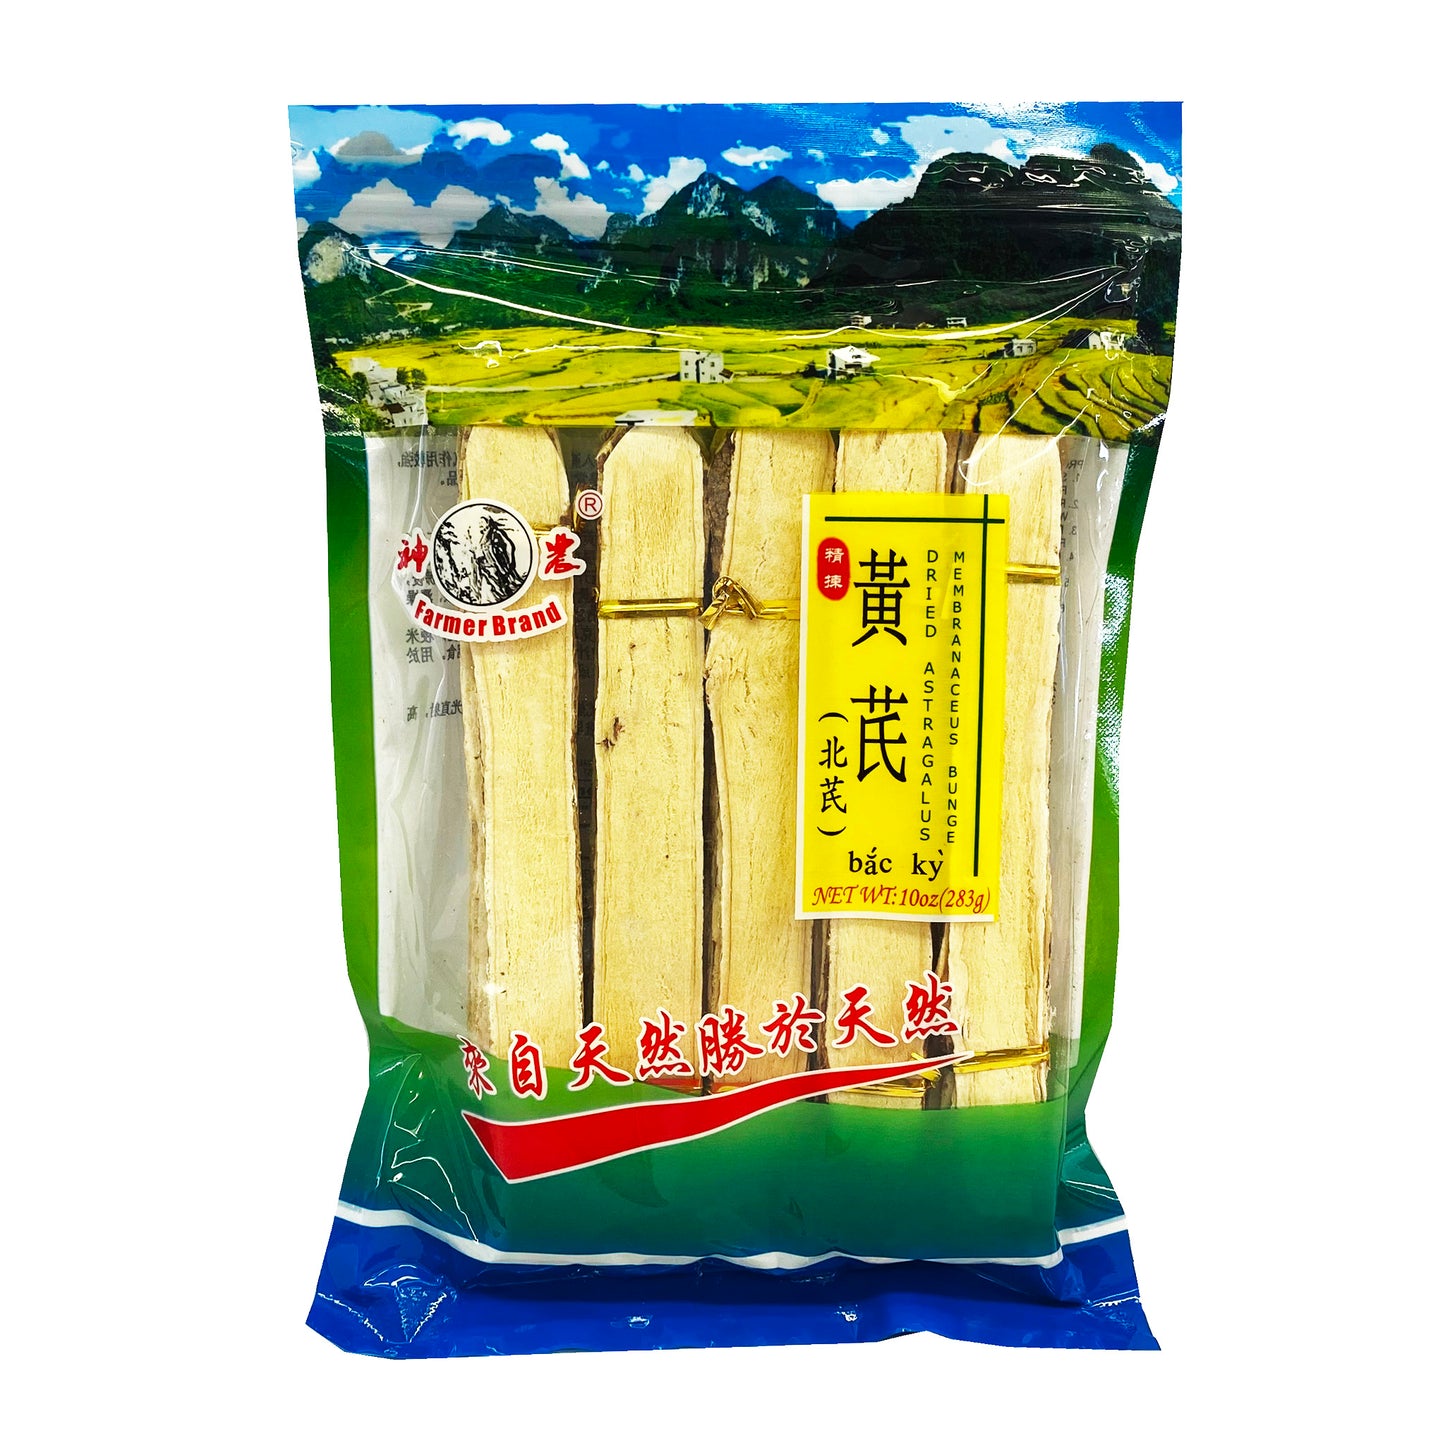 Front graphic image of Farmer Brand Dried Astragalus 10oz (283g) - 神农 精拣黄芪 10oz (283g)